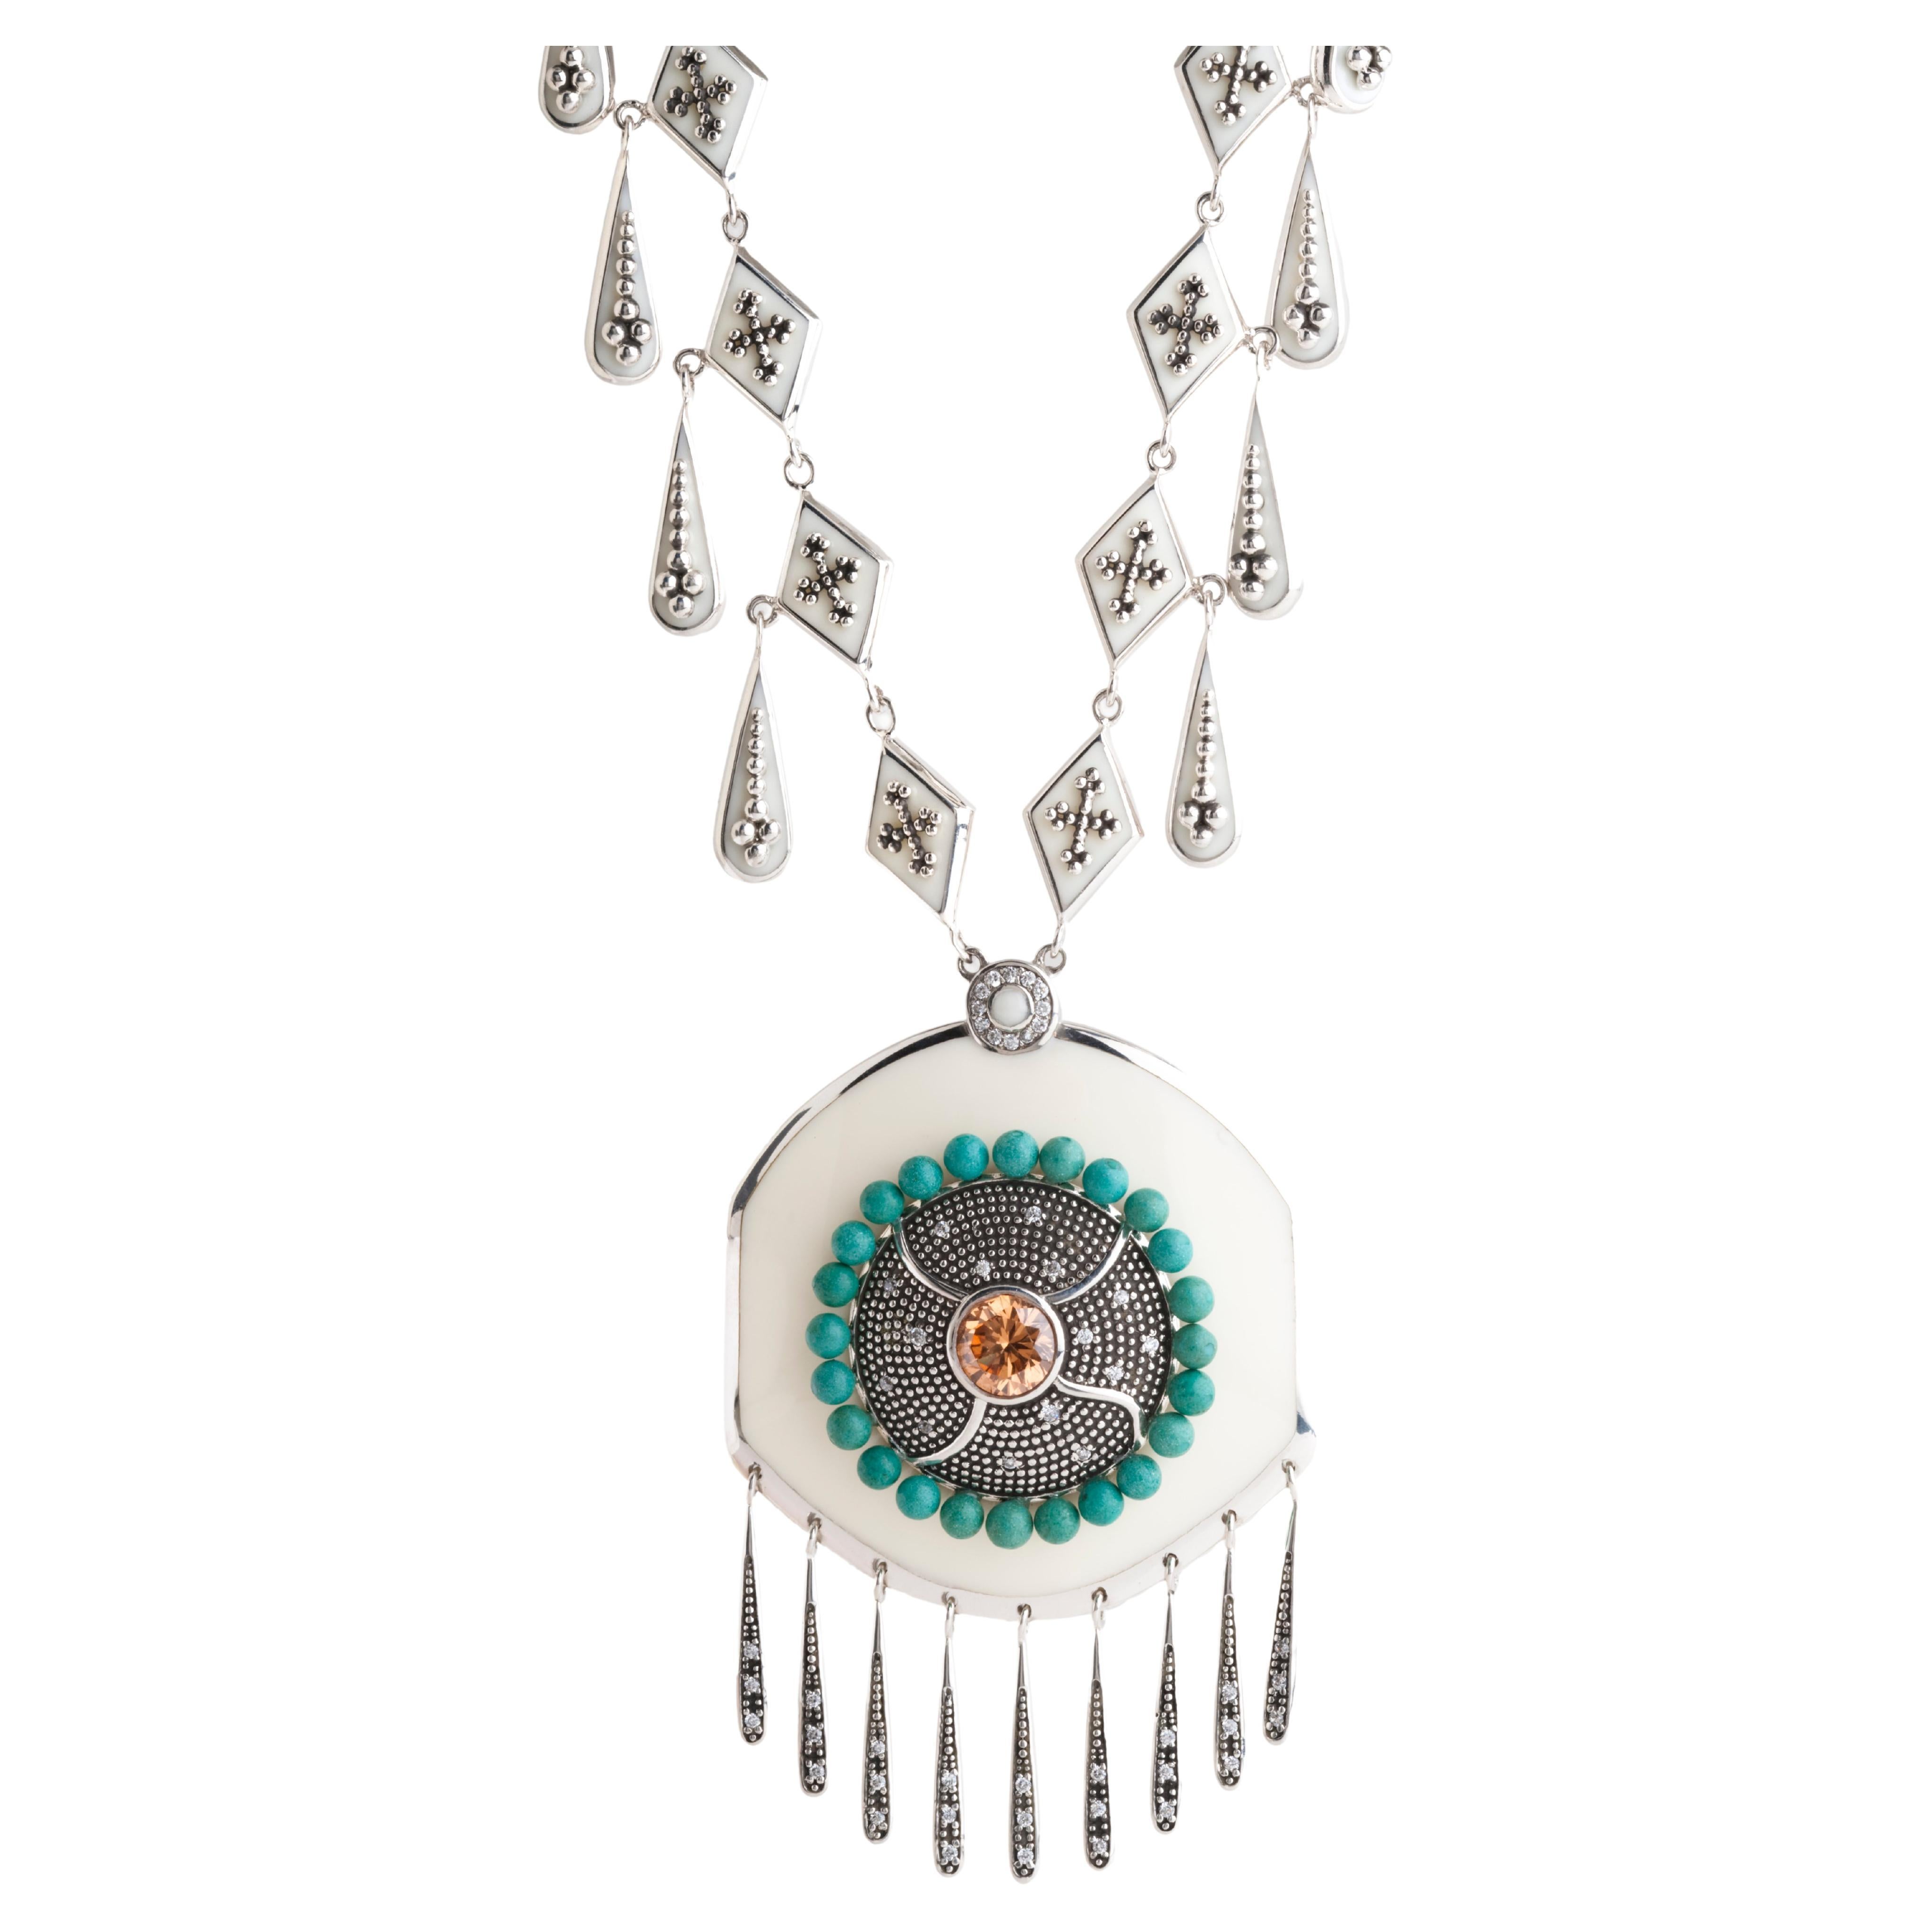 Miriam Salat Bo Ho Chic drop necklace made with white topaz and sterling silver  For Sale